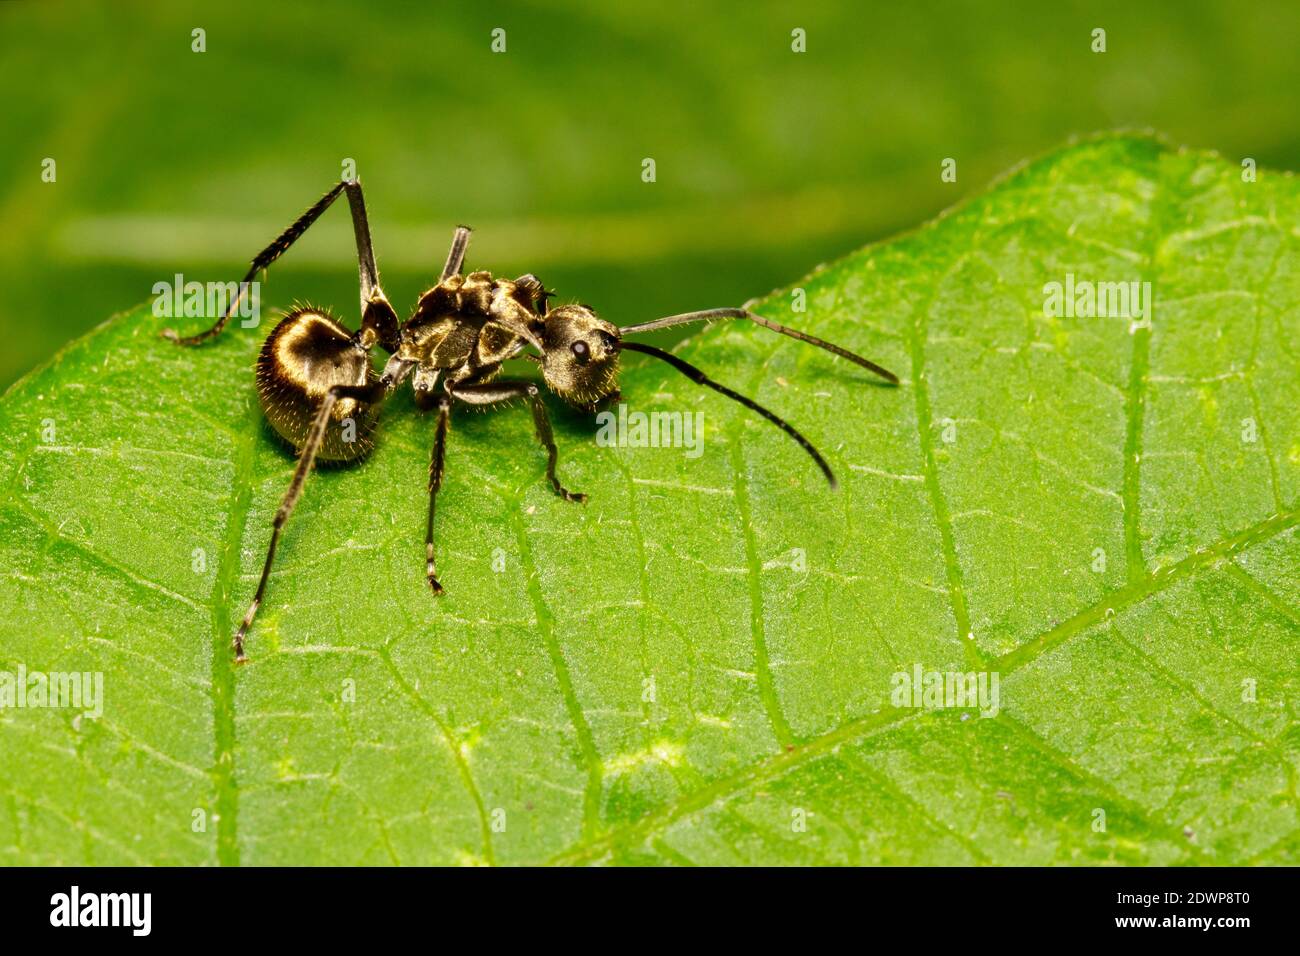 Image of an ant (Polyrhachis dives) on green leaf. Insect. Animal. Stock Photo